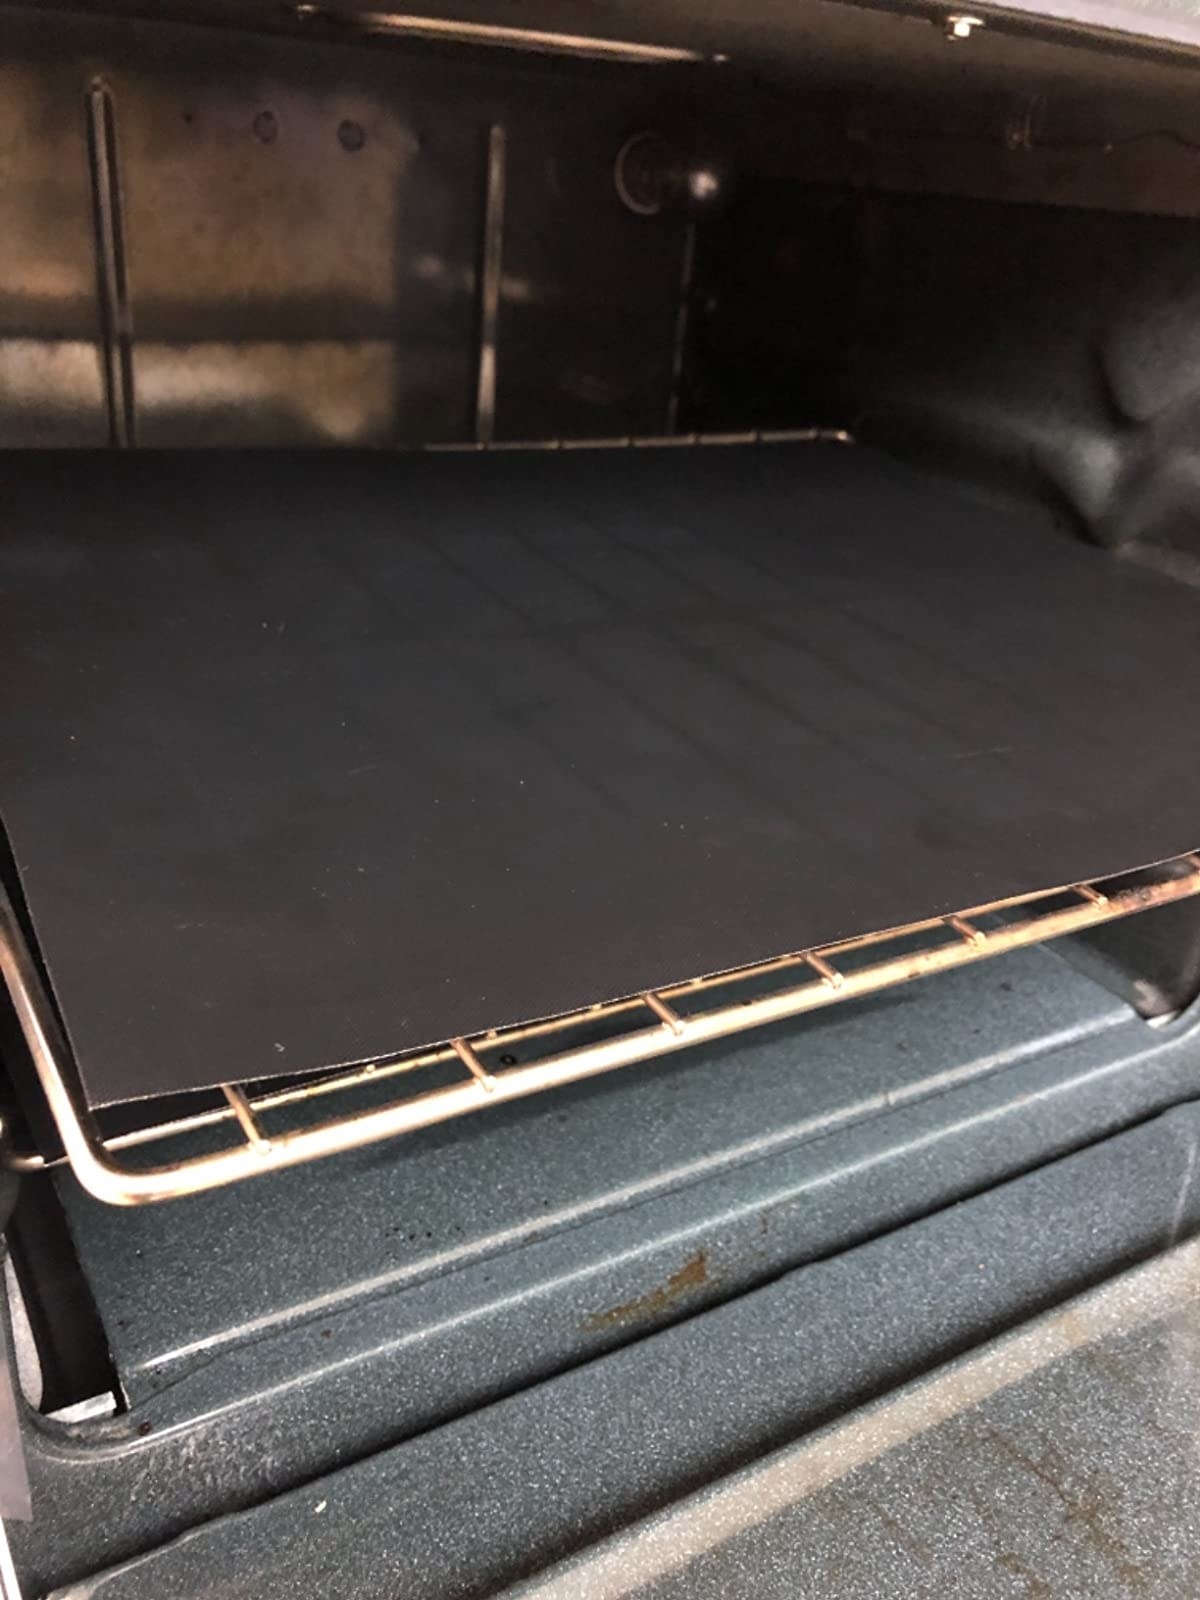 Reviewer image of black liner inside their oven